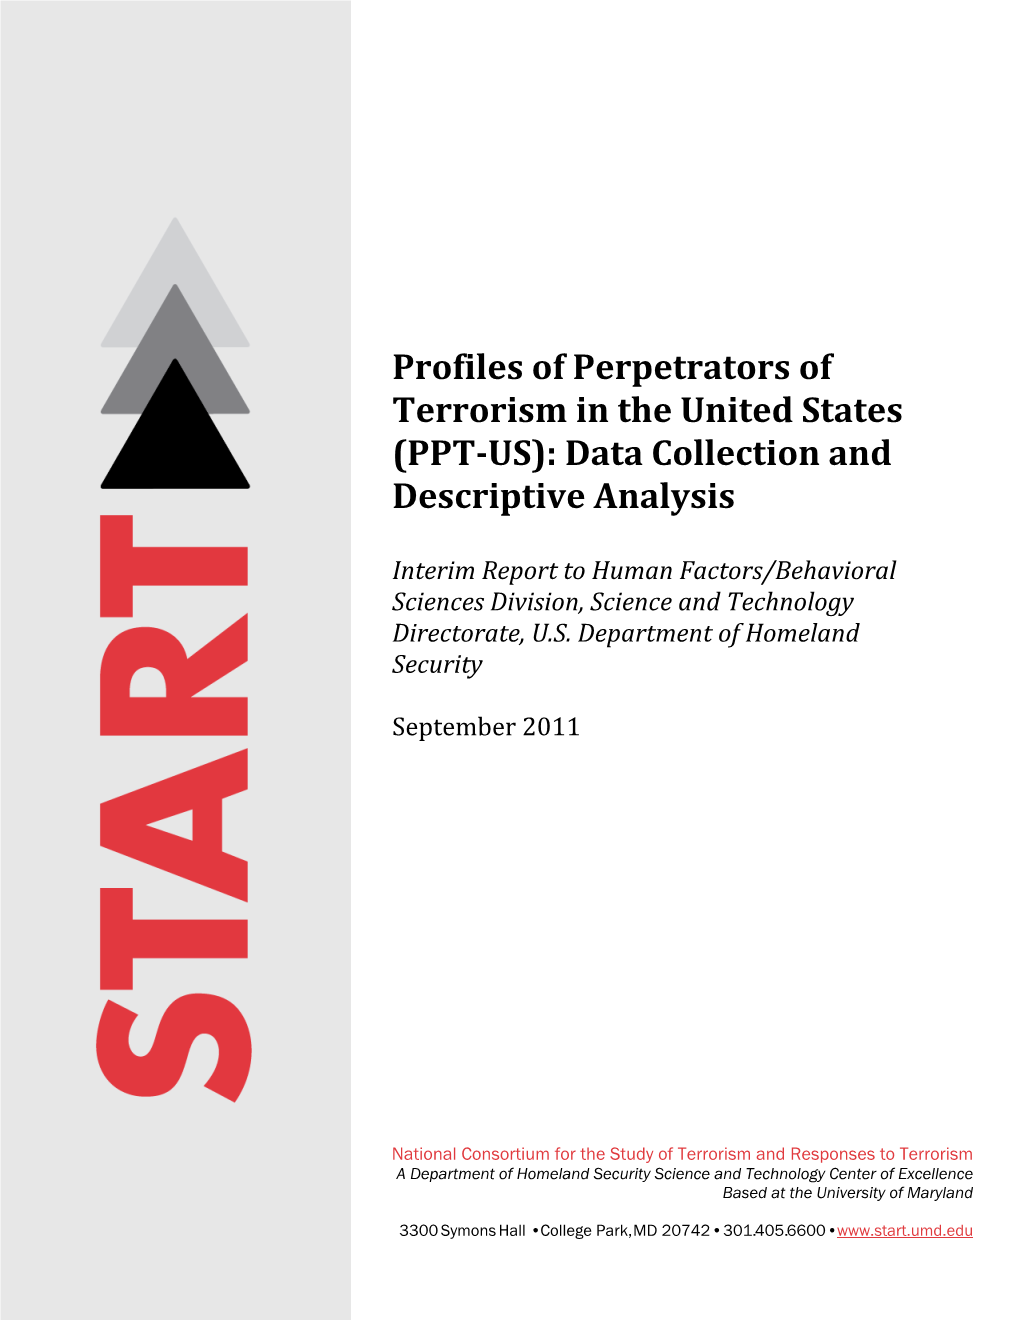 (PPT-US): Data Collection and Descriptive Analysis